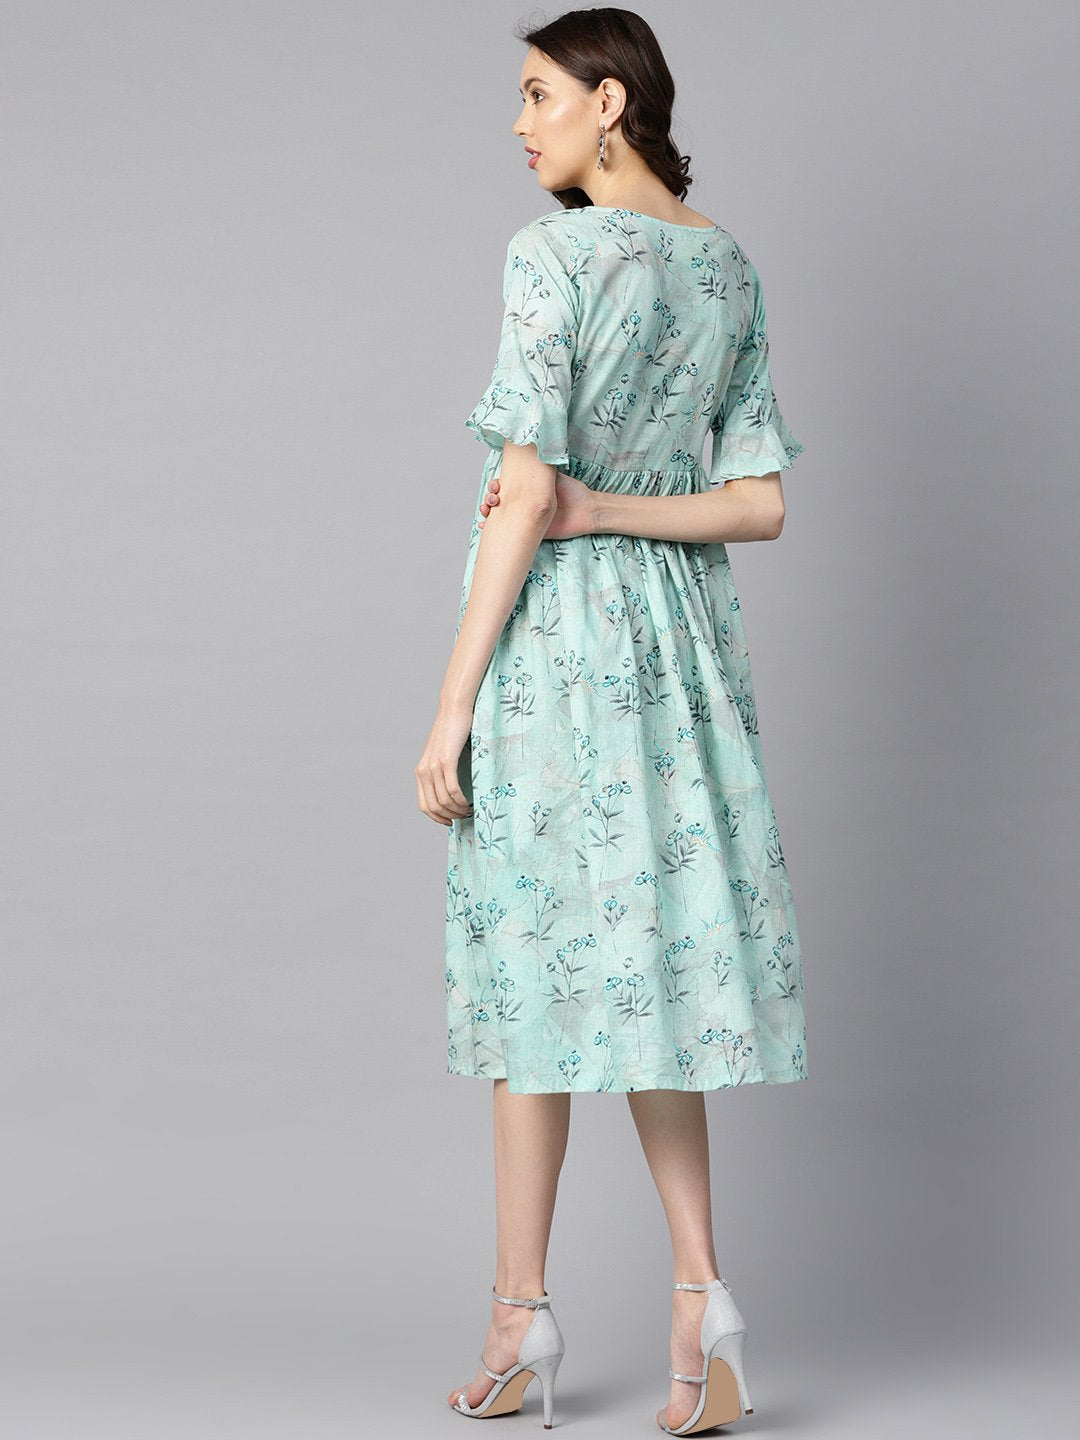 Women's Sky Blue Floral Printed Dress With Flared Sleeves - Nayo Clothing